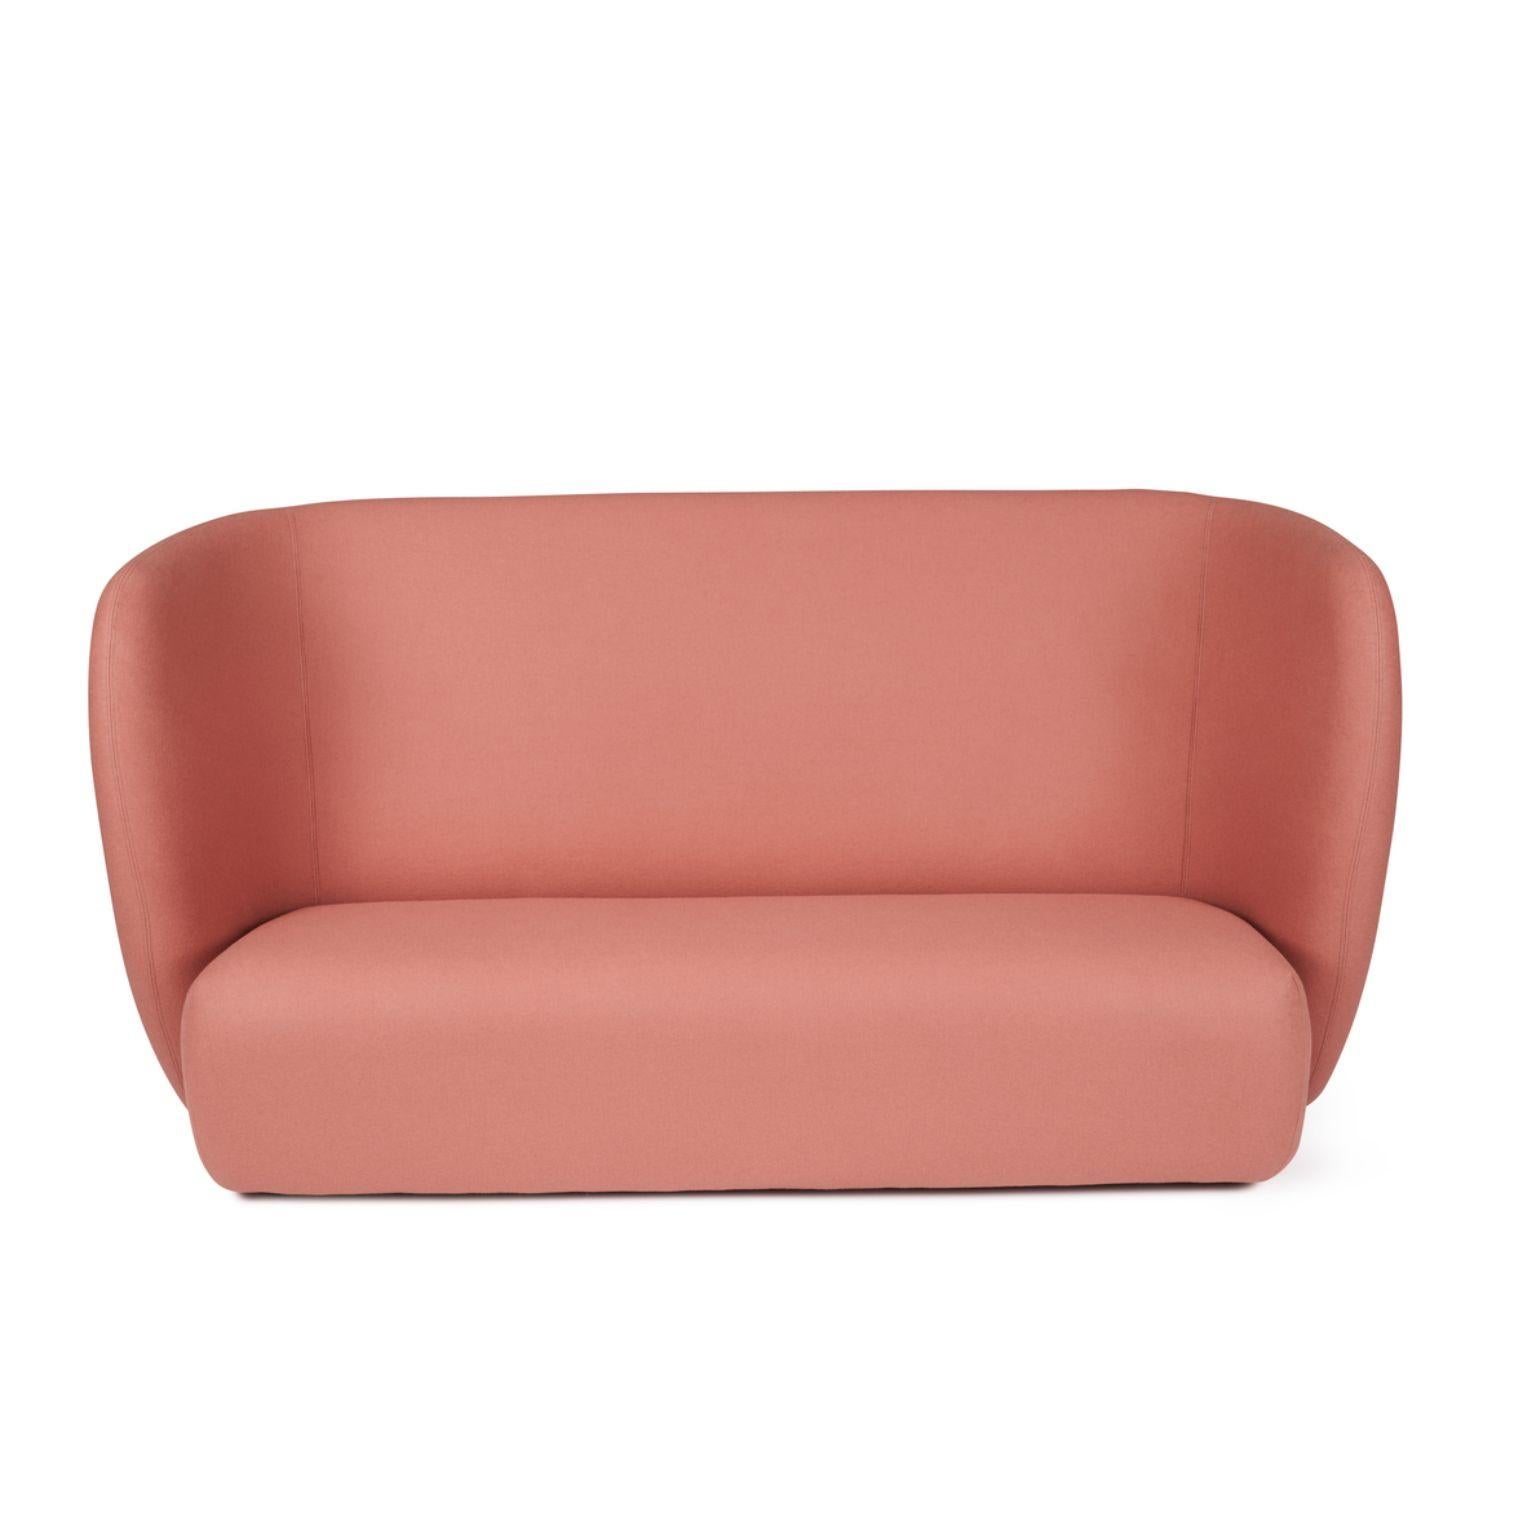 Haven 3 seater blush by Warm Nordic.
Dimensions: D220 x W84 x H 110/40 cm.
Material: textile upholstery, foam, spring system, wood.
Weight: 84 kg
Also available in different colours and finishes. 

Haven is a contemporary sofa with a simple,